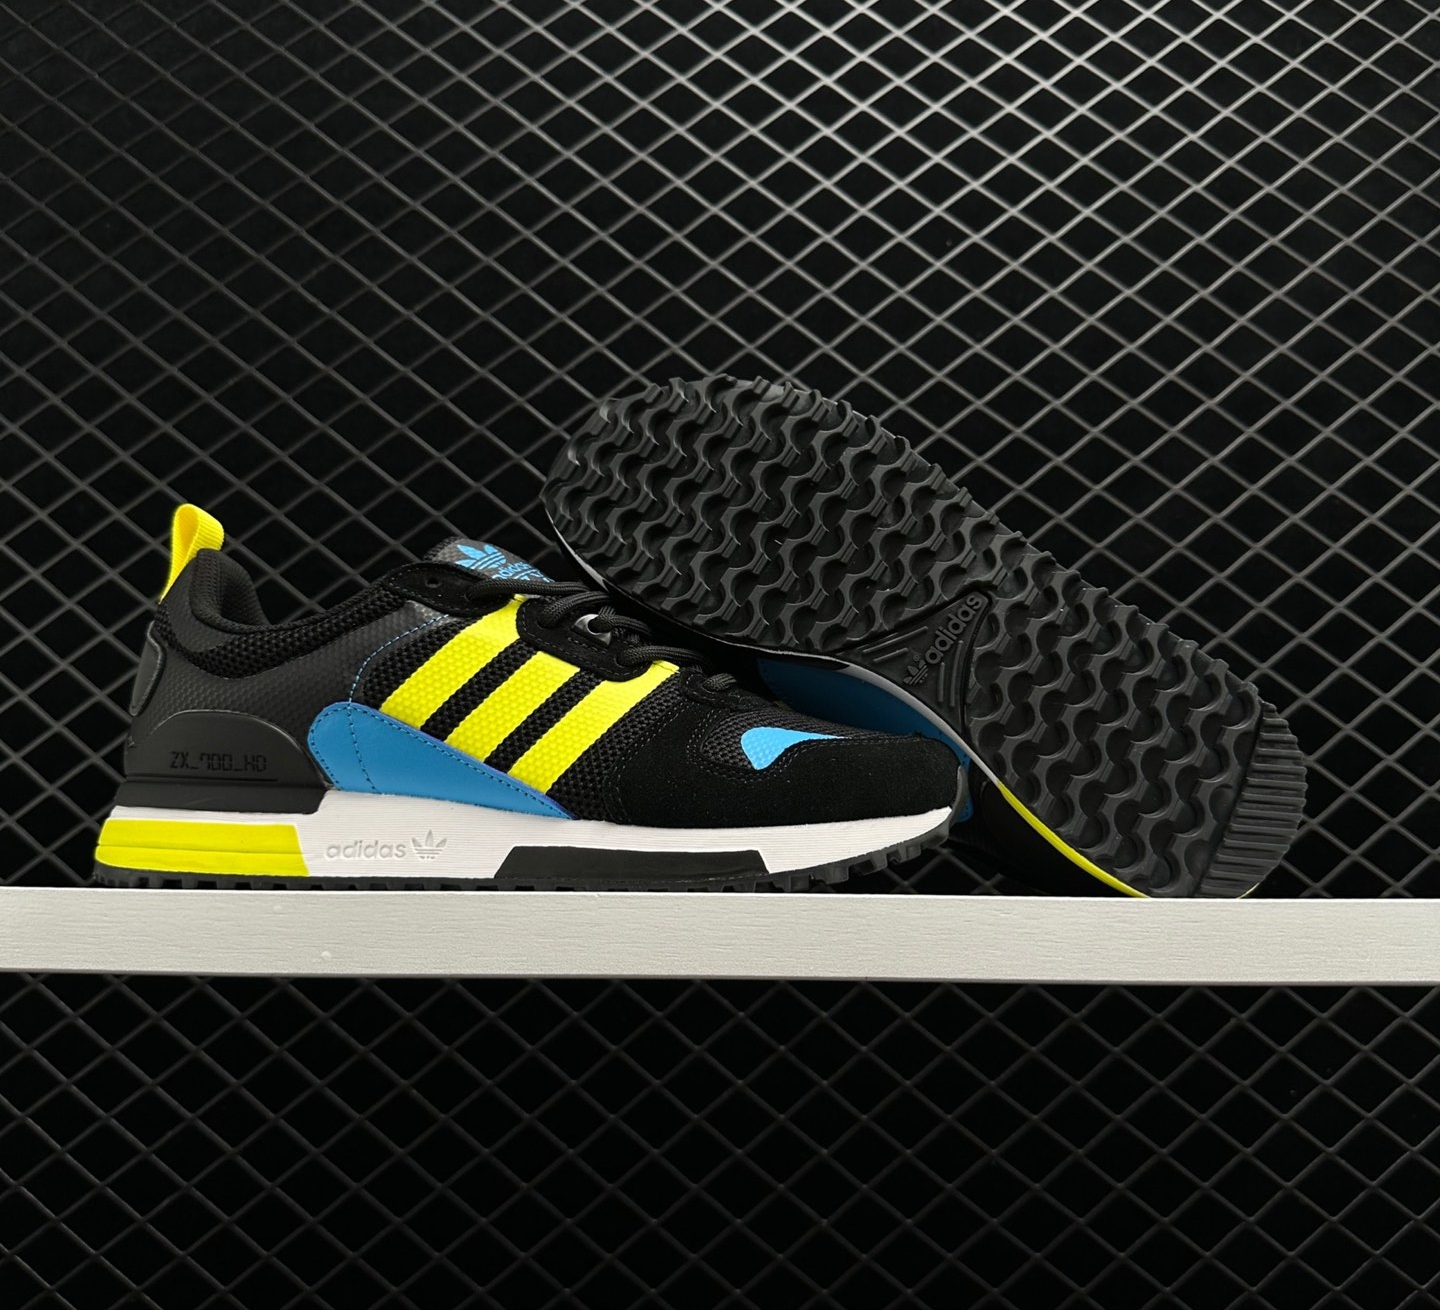 Adidas Originals ZX 700 HD Casual Shoes – Stylish Footwear for Everyday Comfort